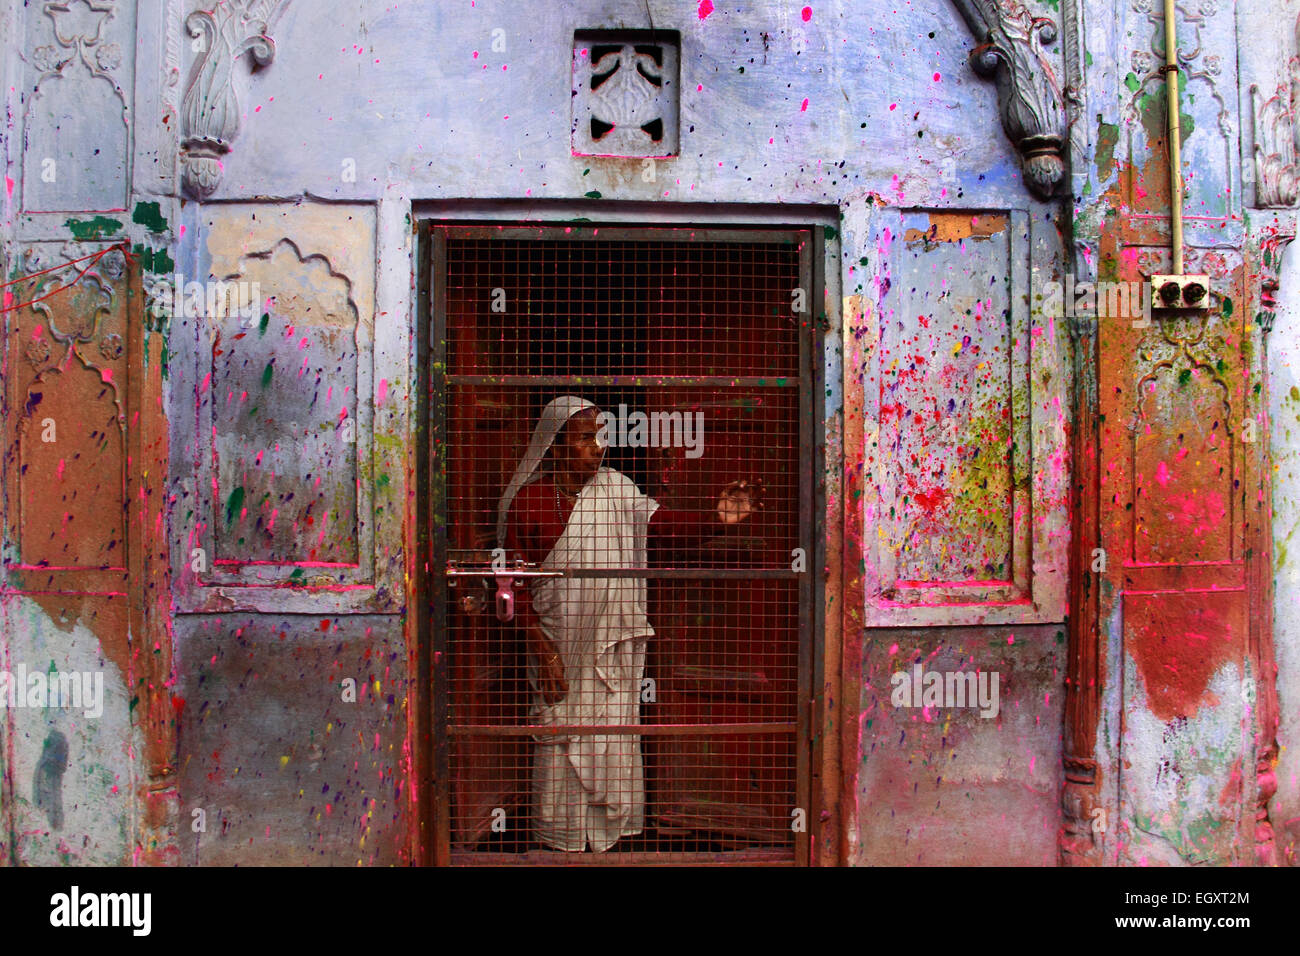 Ashram, Vrindavan, India. 03rd Mar, 2015. A widow stands at their room door, watching the Holi celebration on Tuesday at century old 'Pagal Baba Ashram' in Vrindavan, India. It is probably the first time when widows from Varanasi joined their sisters in Vrindavan for celebrating the festival of colors, breaking an age-old Hindu tradition, a release issued by NGO Sulabh International said. © Shashi Sharma/Pacific Press/Alamy Live News Credit:  PACIFIC PRESS/Alamy Live News Stock Photo